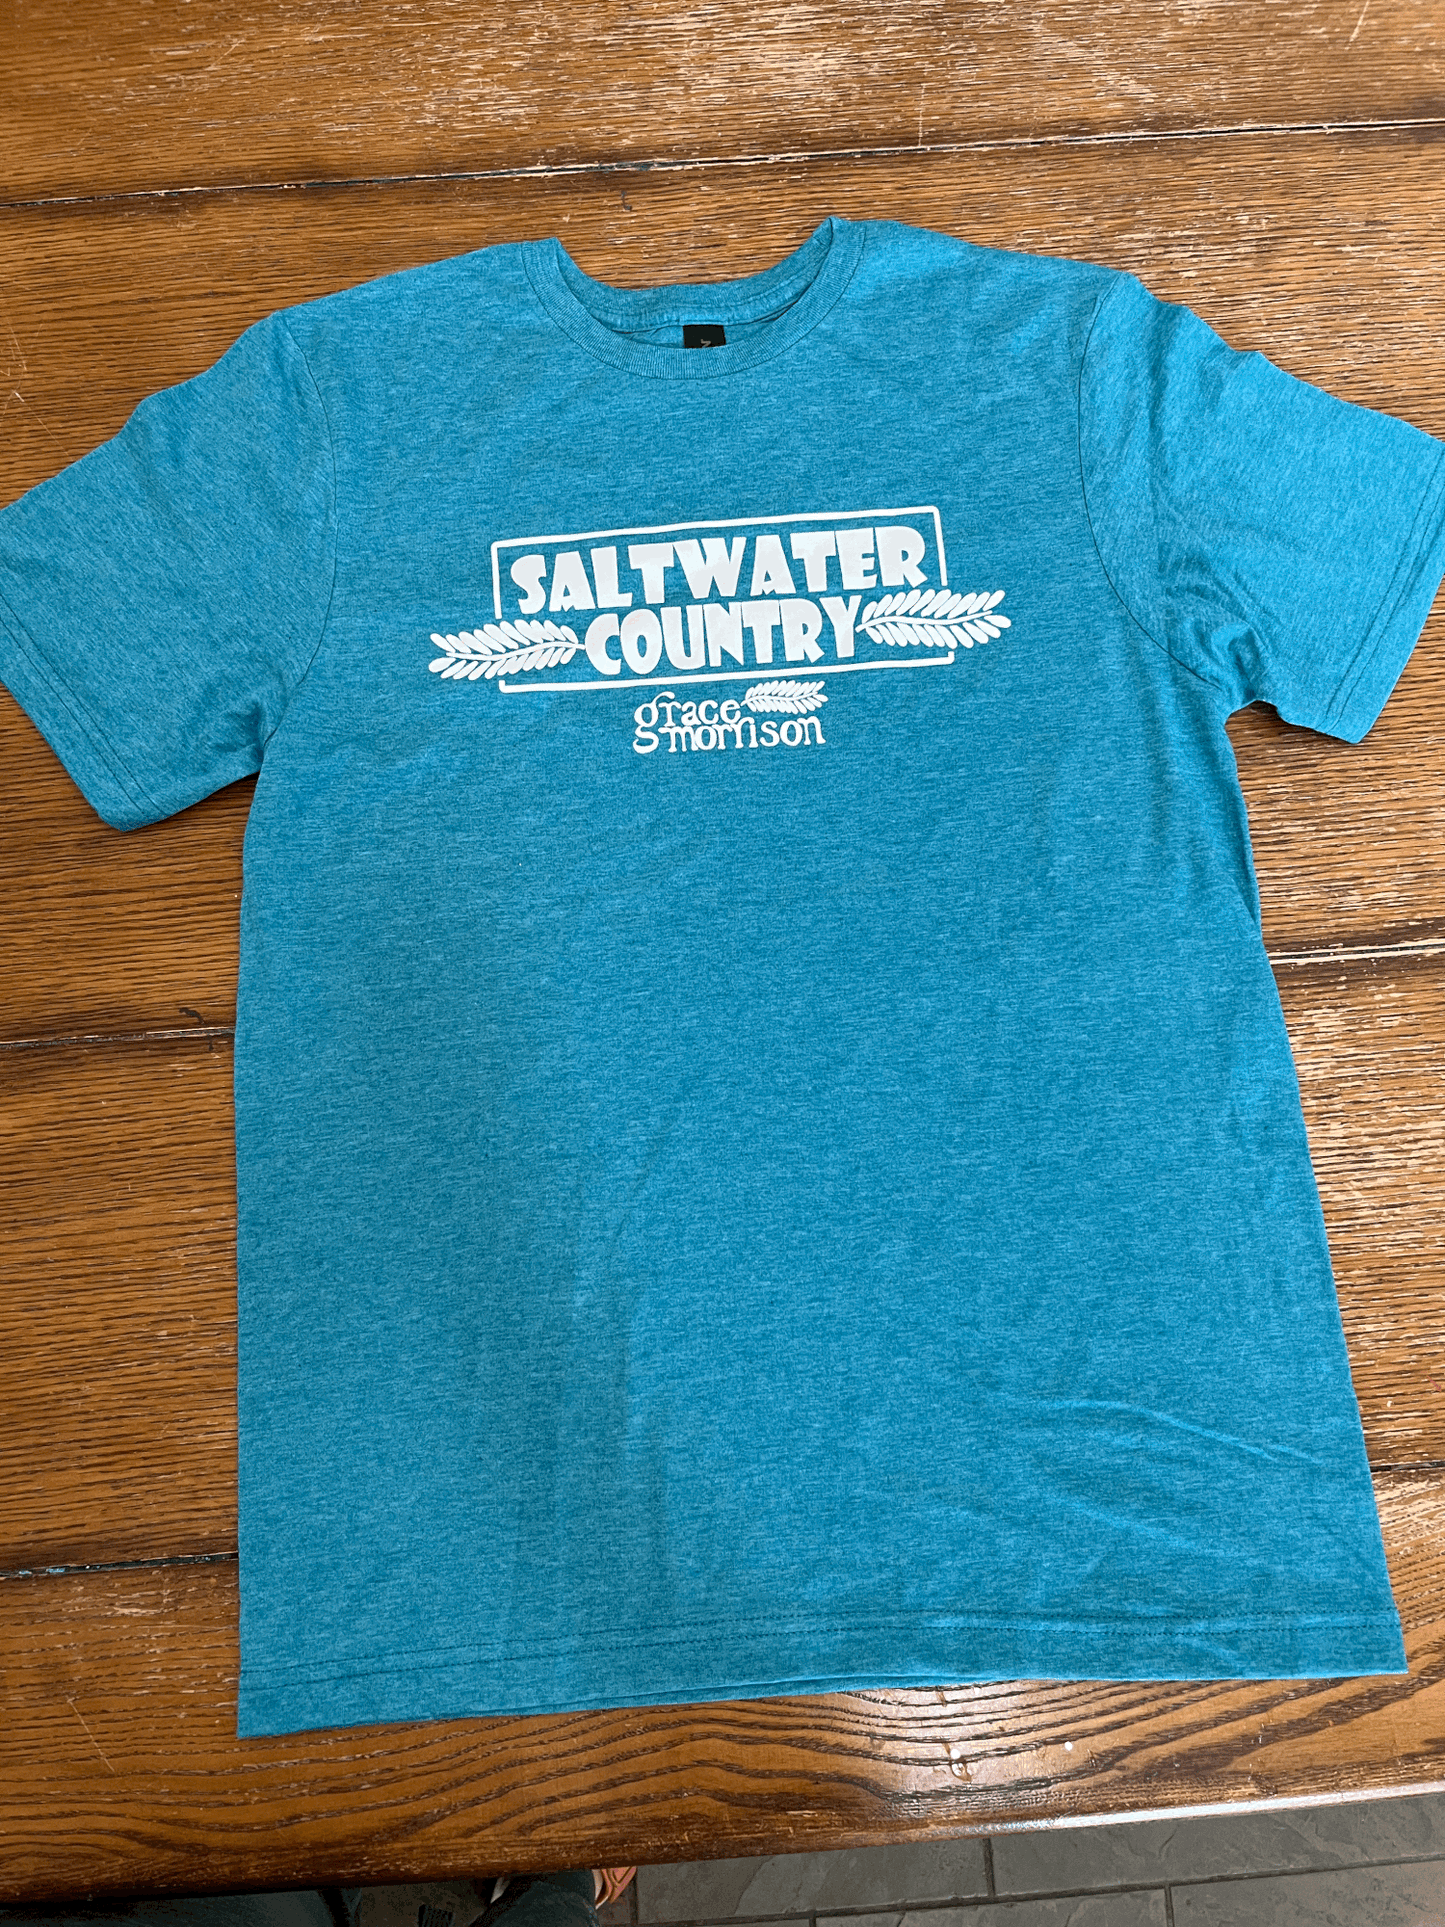 Saltwater Country Tshirt